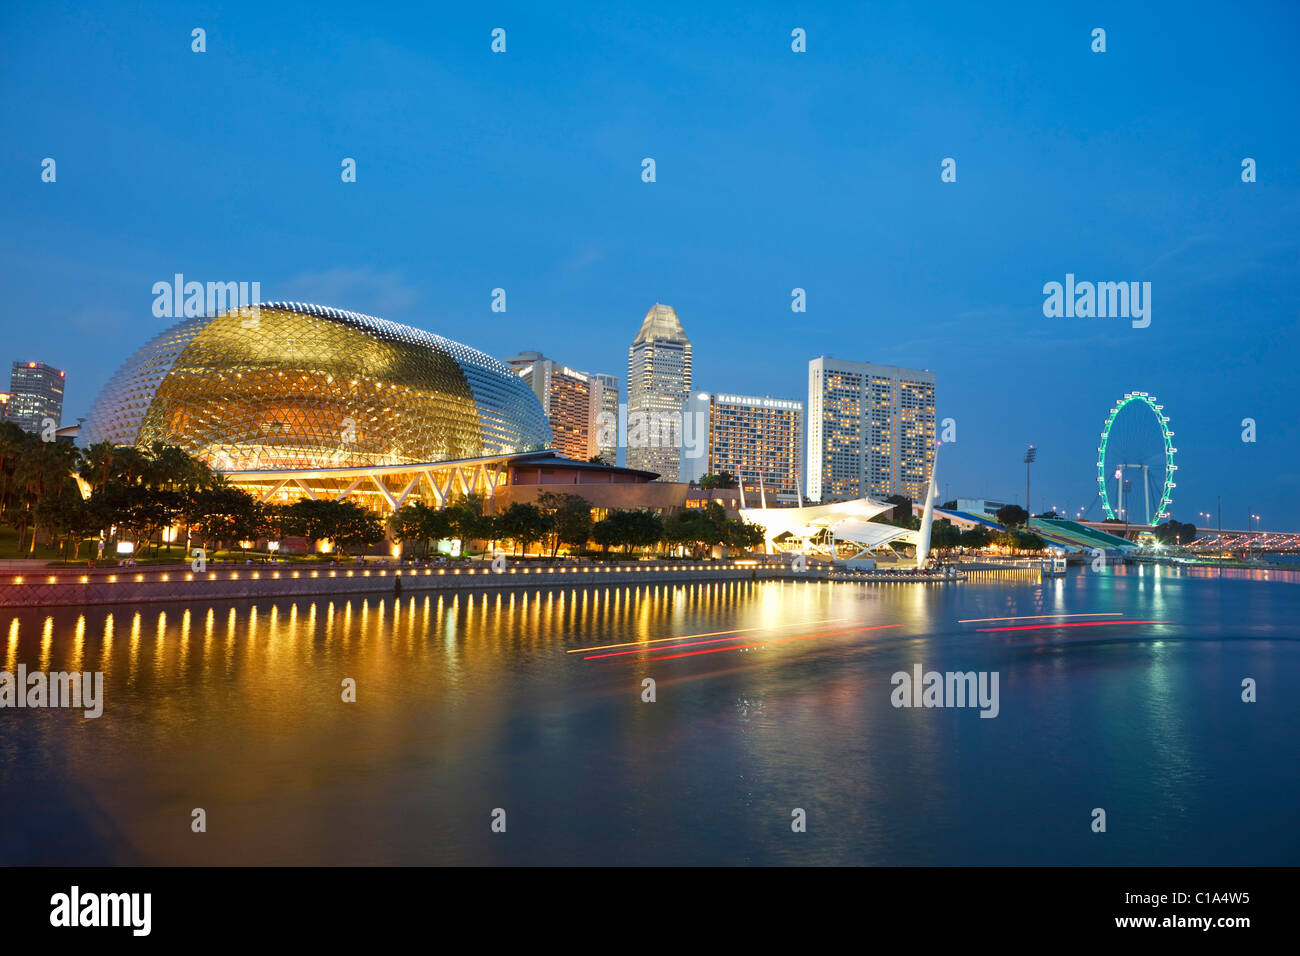 Esplanade - Theatres on the Bay building and Singapore Flyer at dusk.  Marina Bay, Singapore Stock Photo